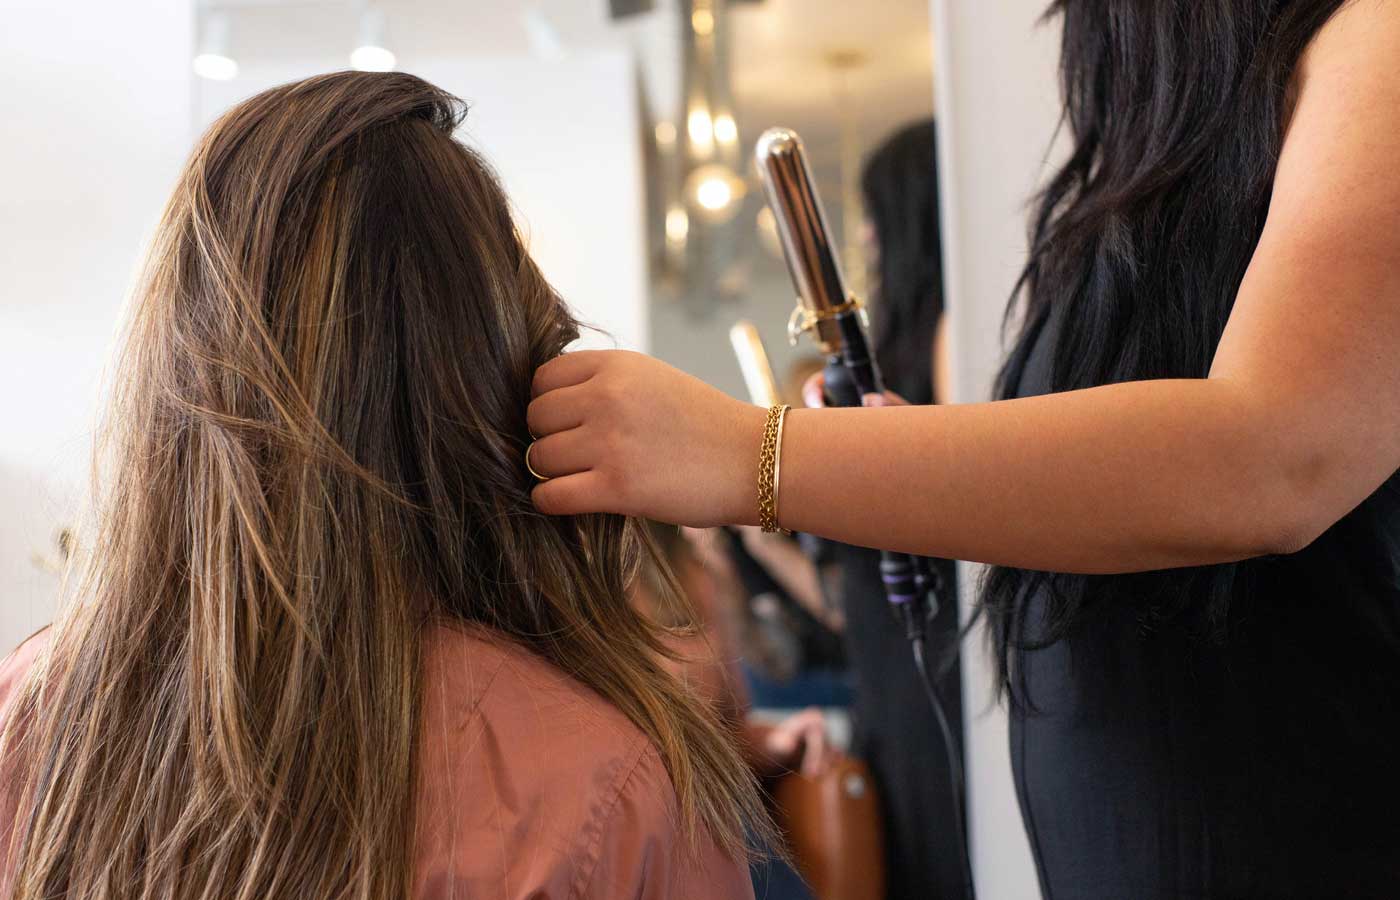 Shows a woman curling a client's hair with a heated styler